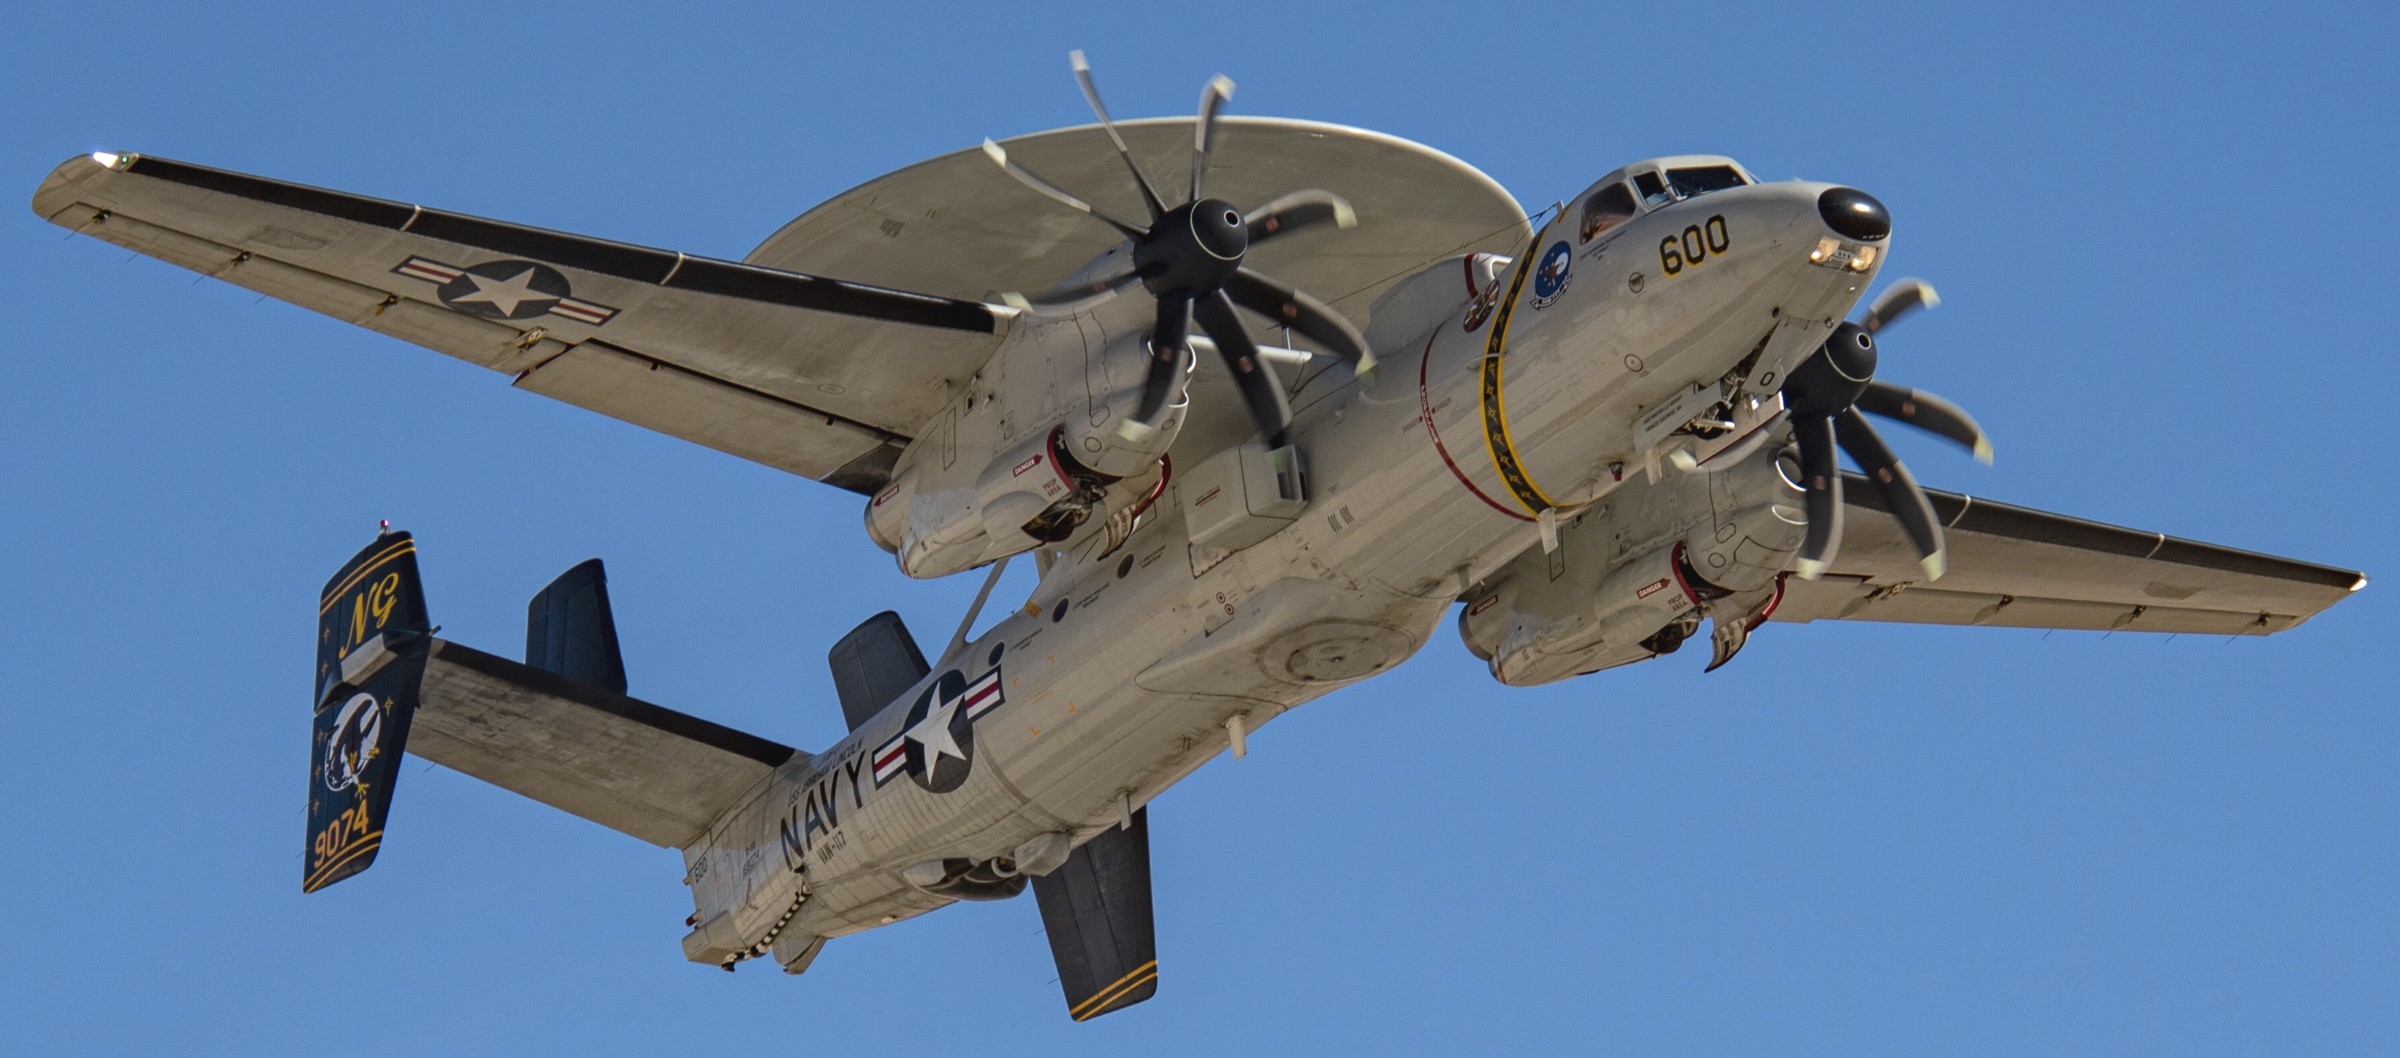 vaw-117 wallbangers airborne command and control squadron navy e-2d hawkeye cvw-9 uss abraham lincoln cvn-72 39